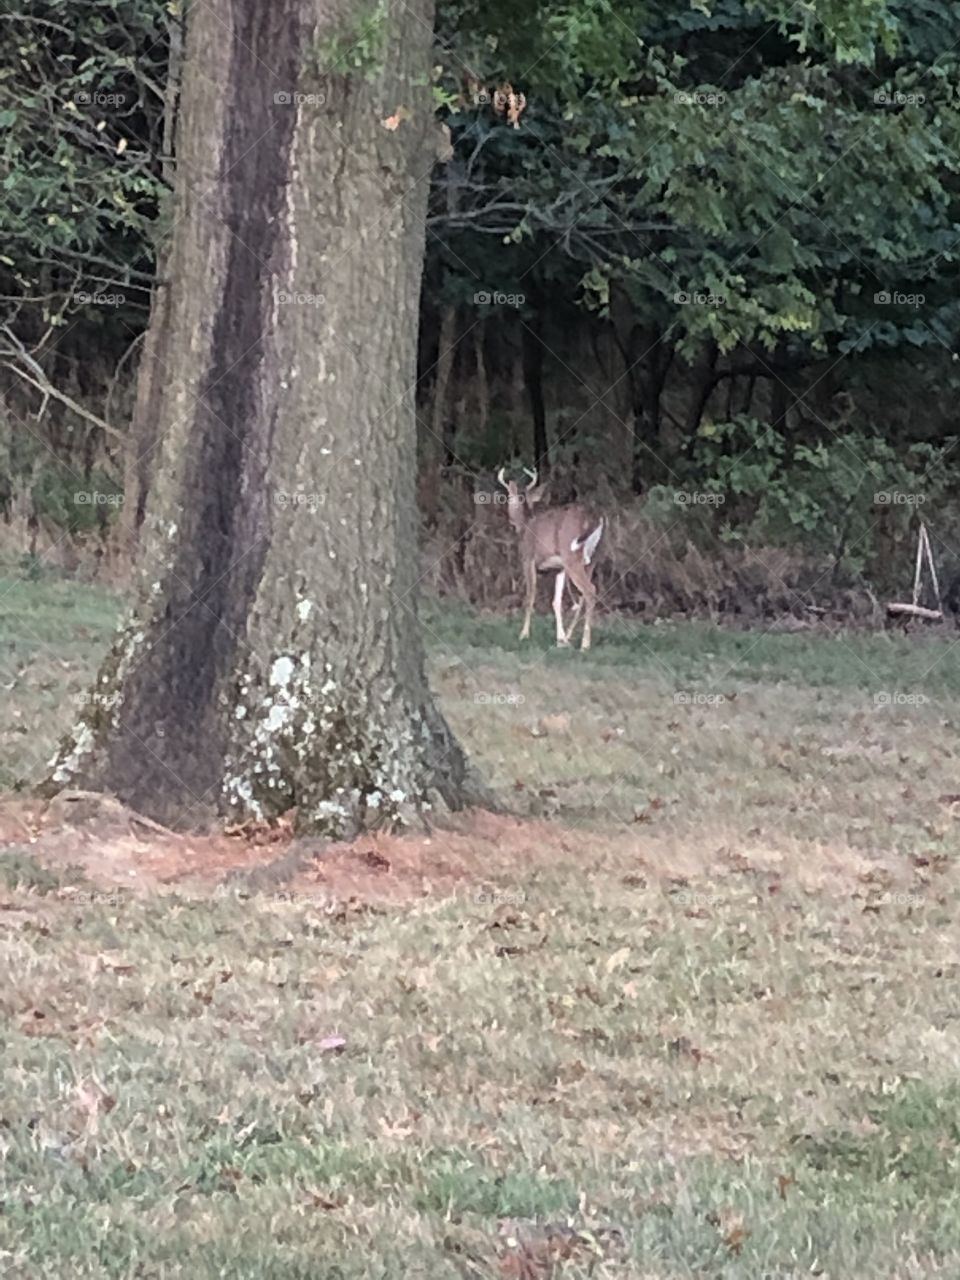 Buck retreating back into the woods 